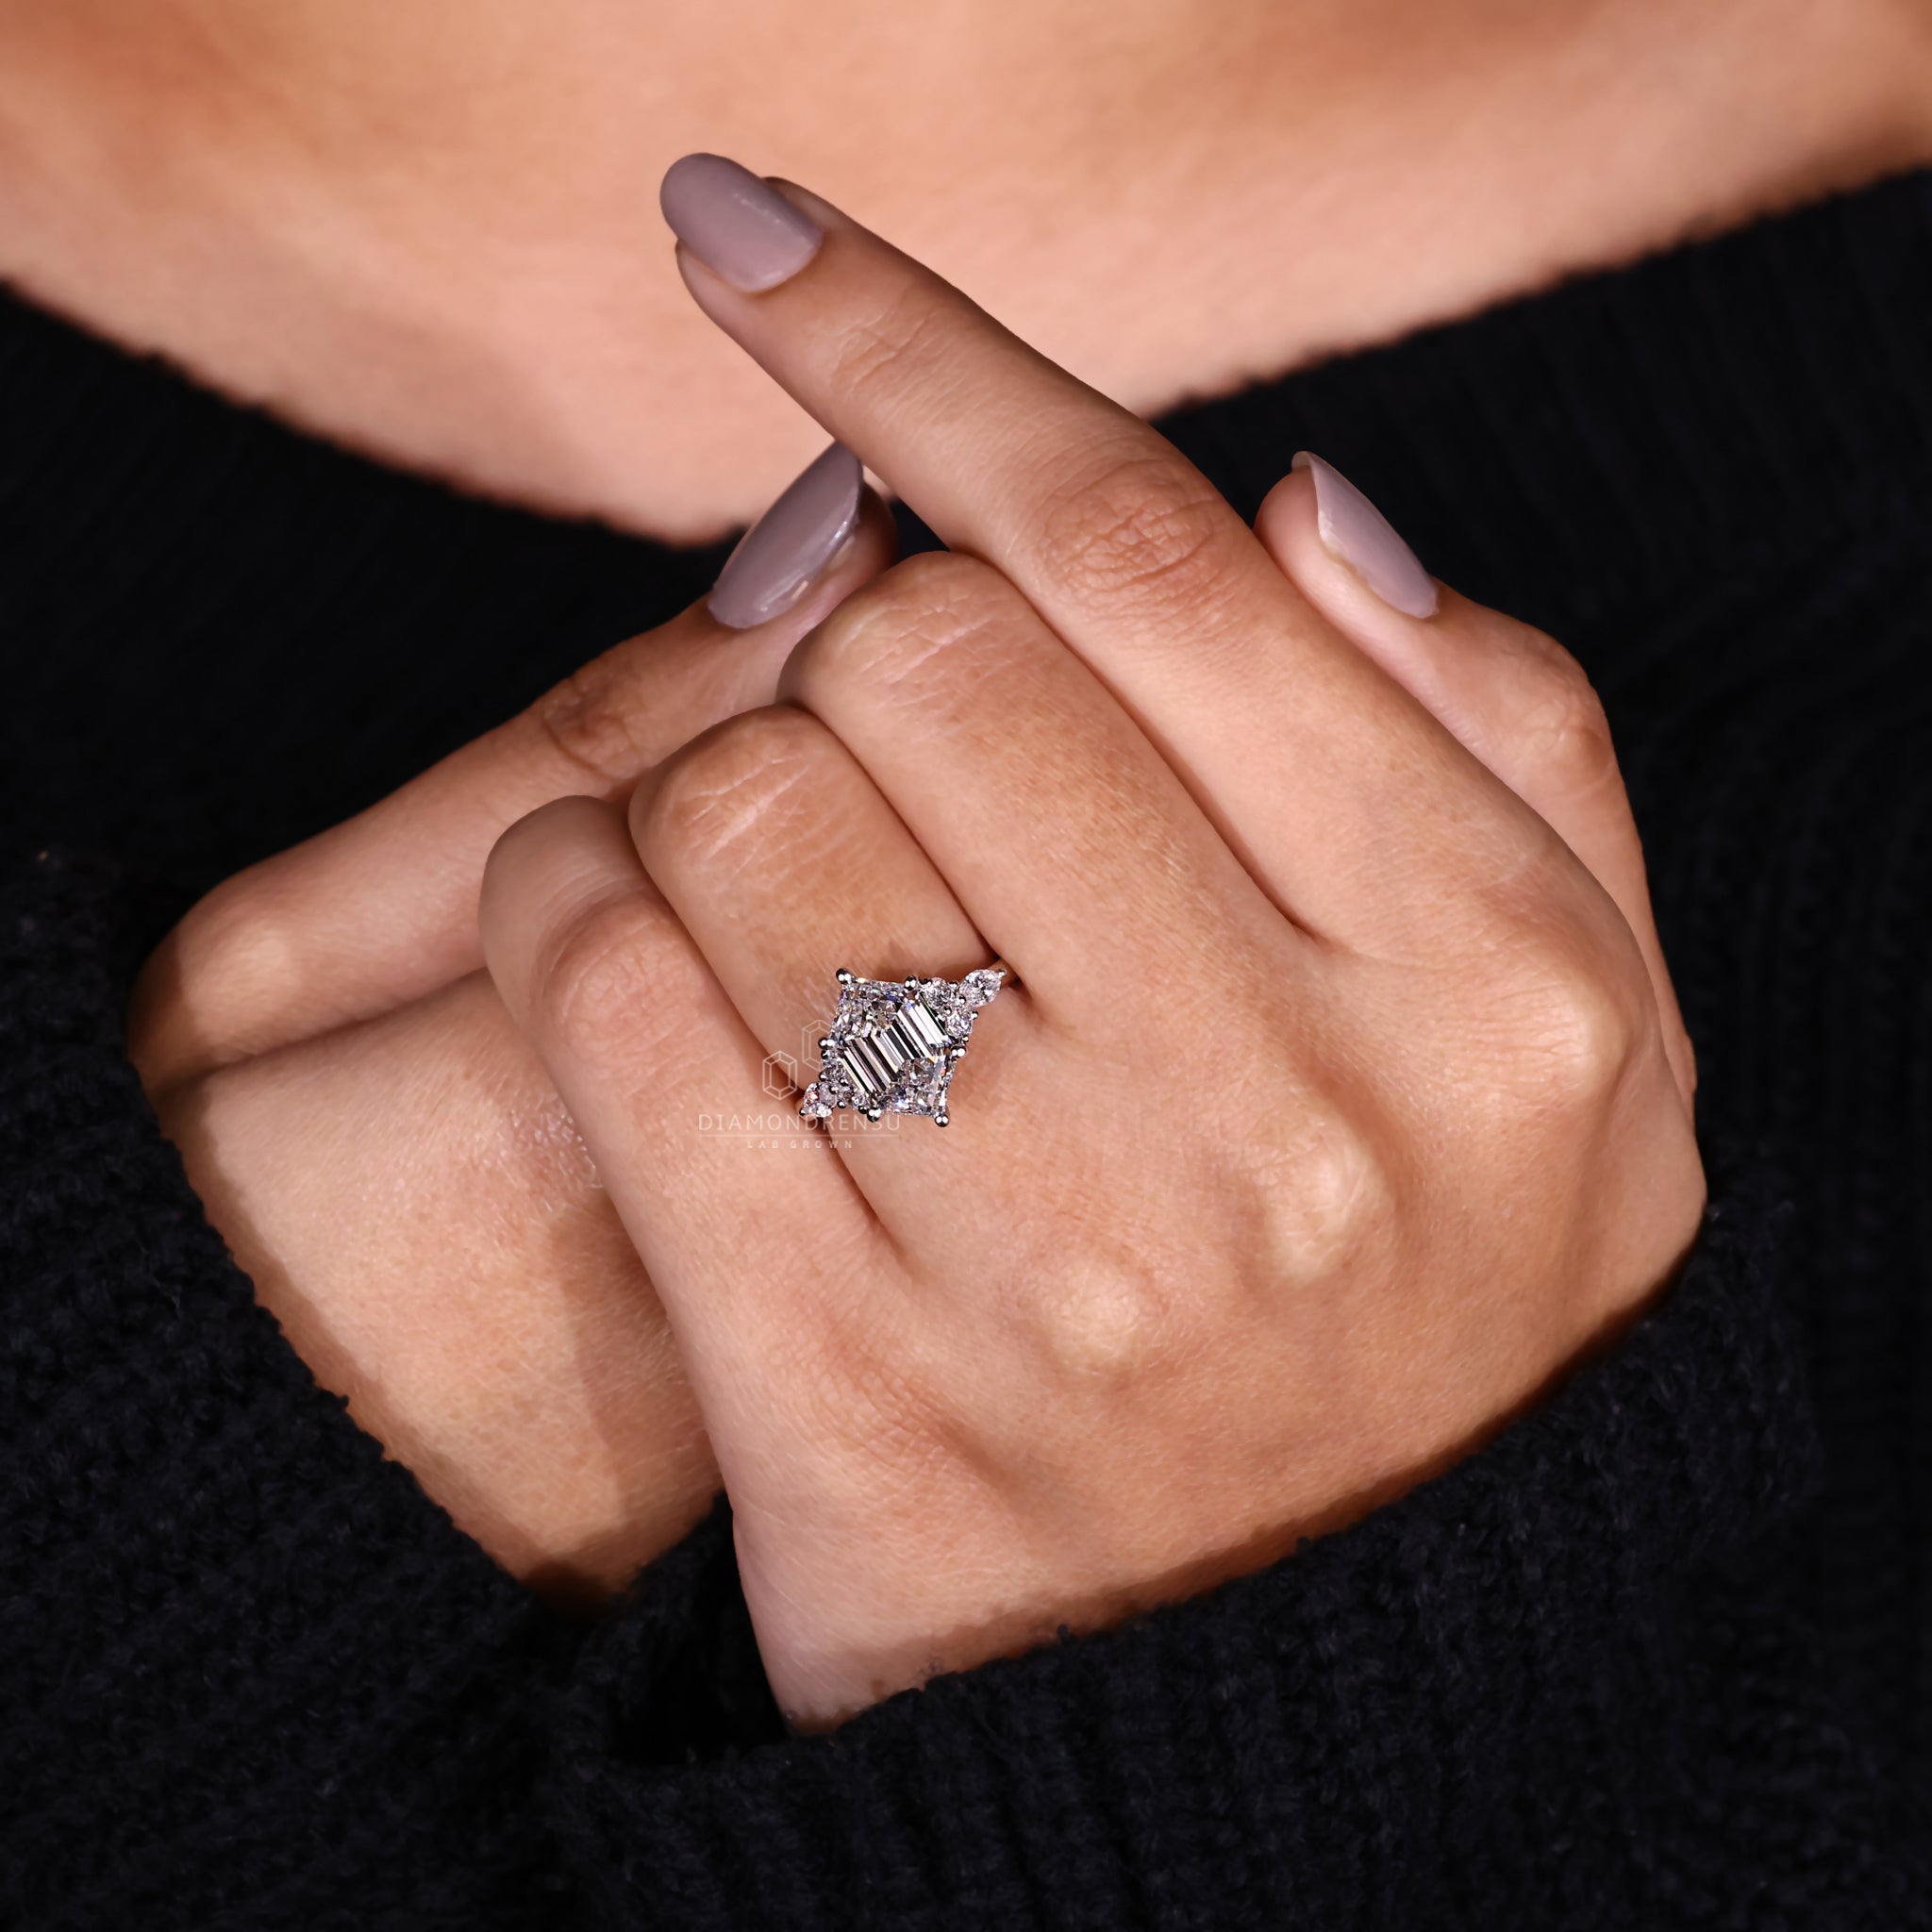 A hexagon diamond engagement ring displayed on a hand, illustrating its graceful proportions and eye-catching brilliance